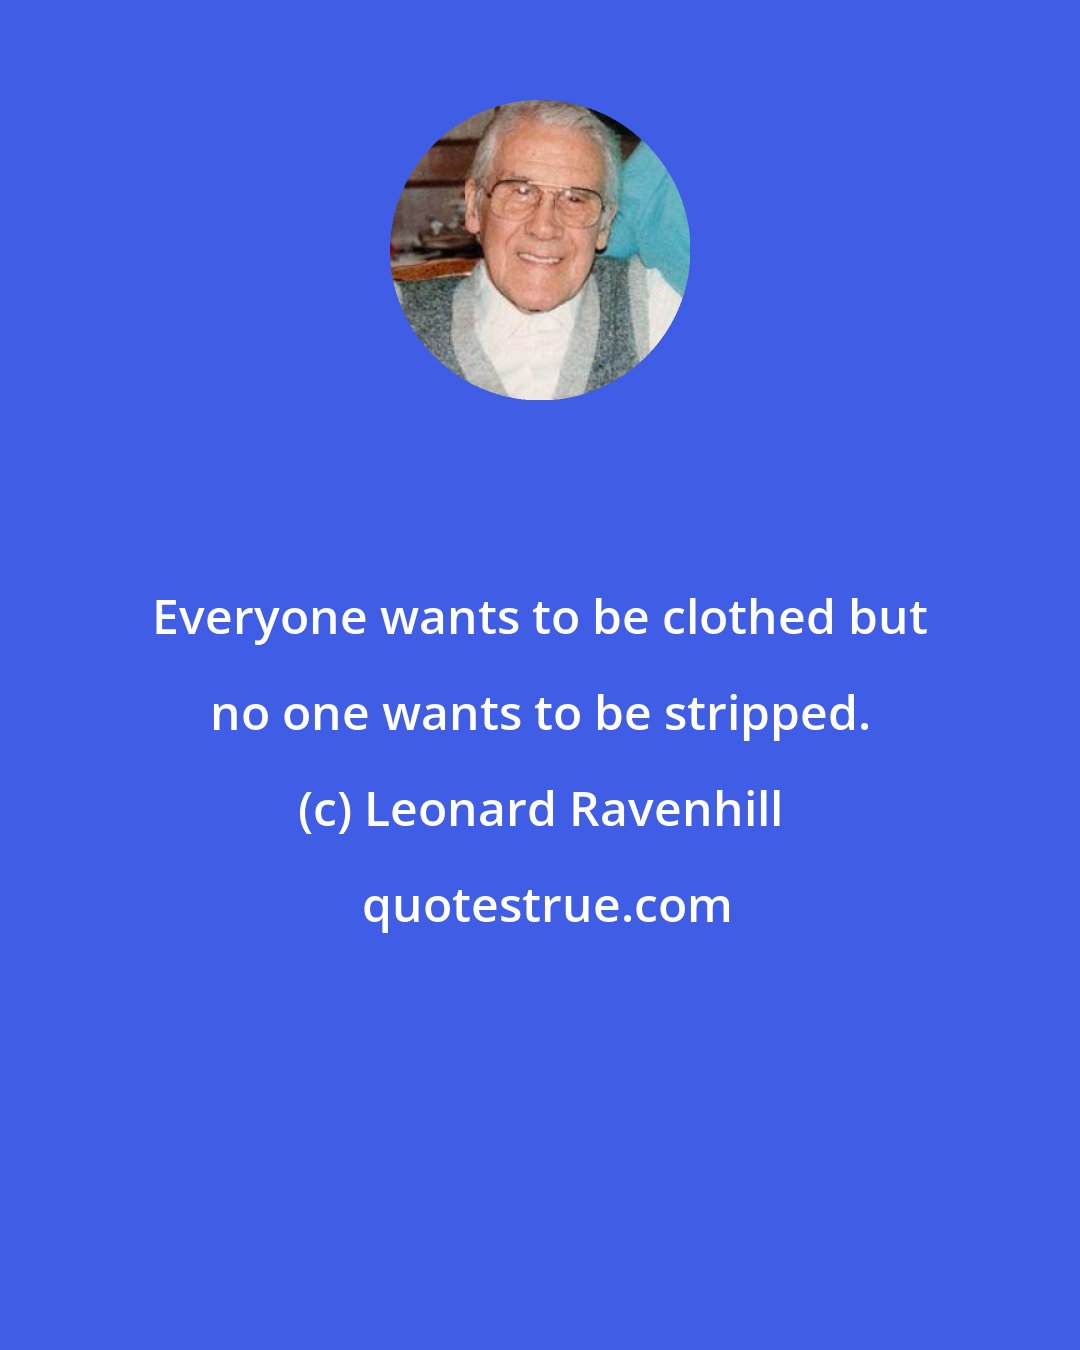 Leonard Ravenhill: Everyone wants to be clothed but no one wants to be stripped.